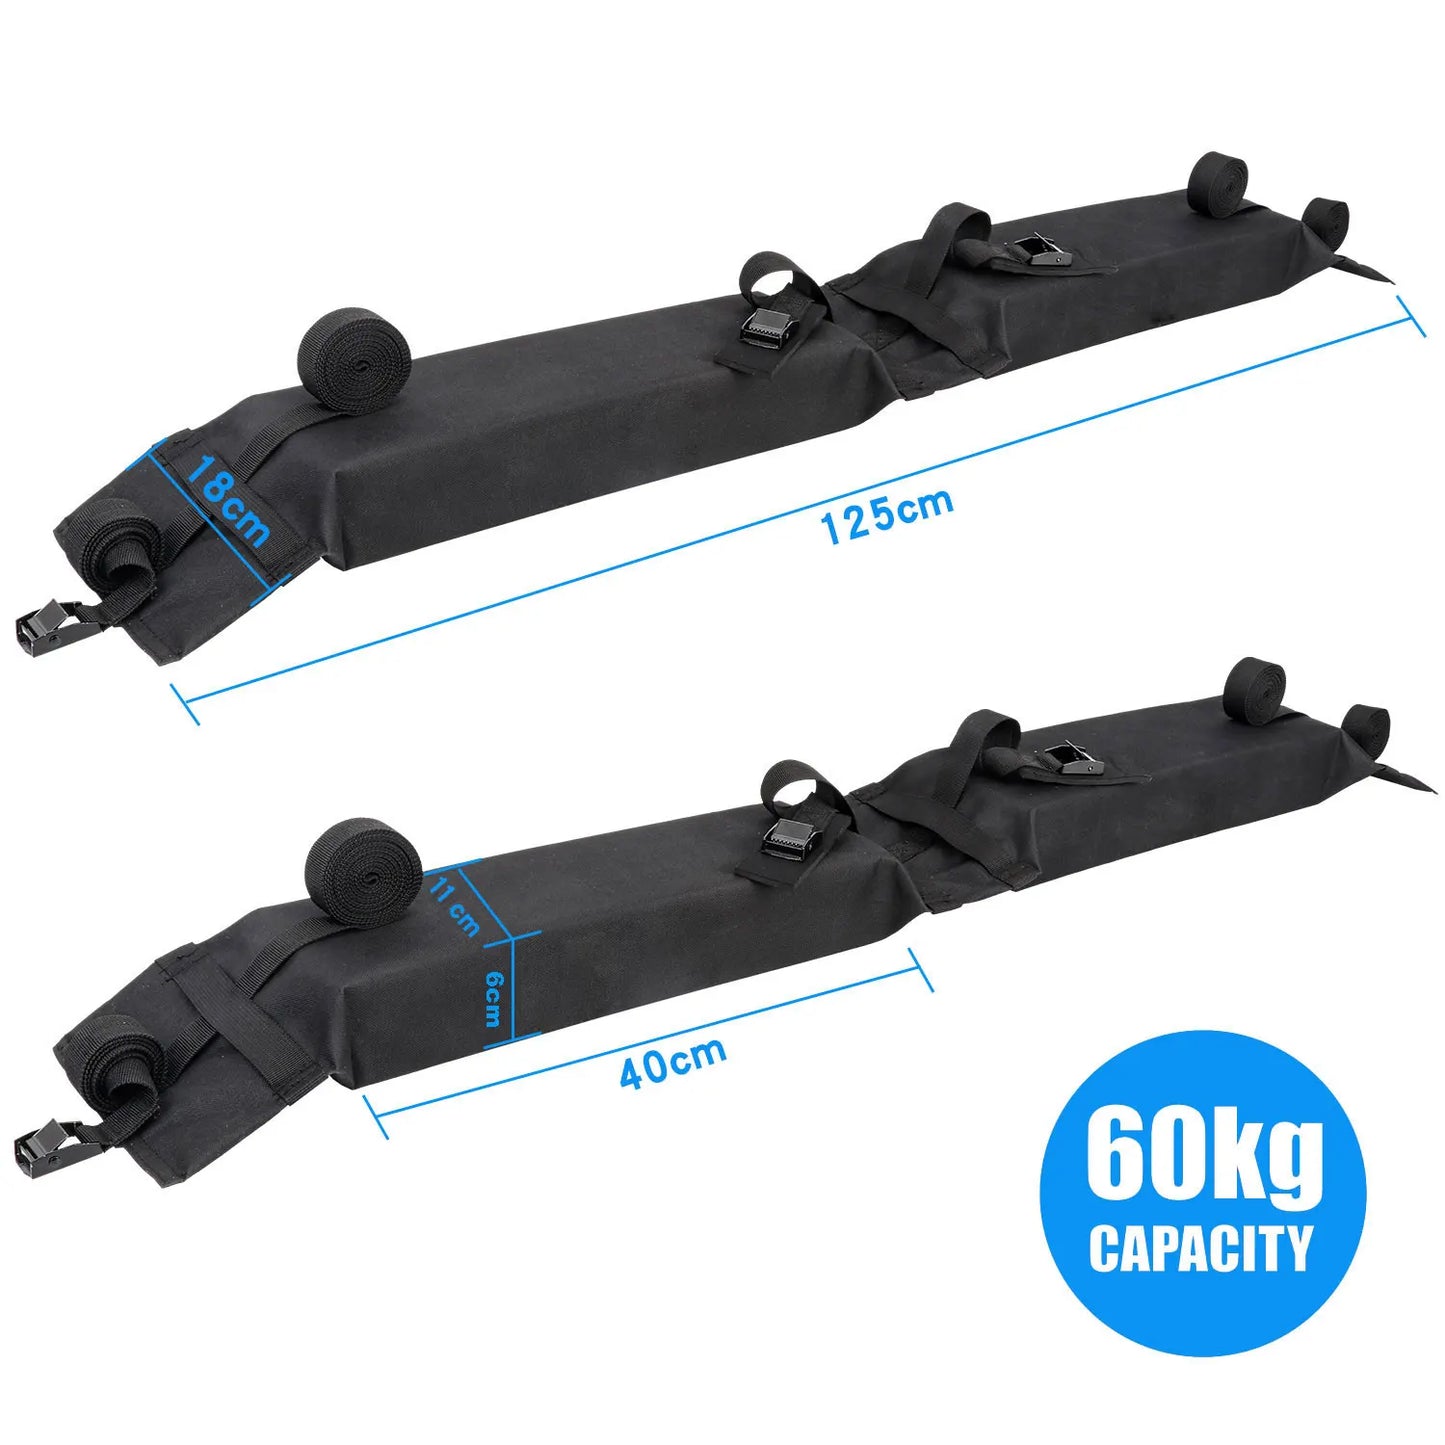 Car Soft Roof Rack Pads for Kayak Surfboard SUP Canoe Luggage Carrier SUV Crossbar Windsurfing Camping Cargo Tie Down Straps